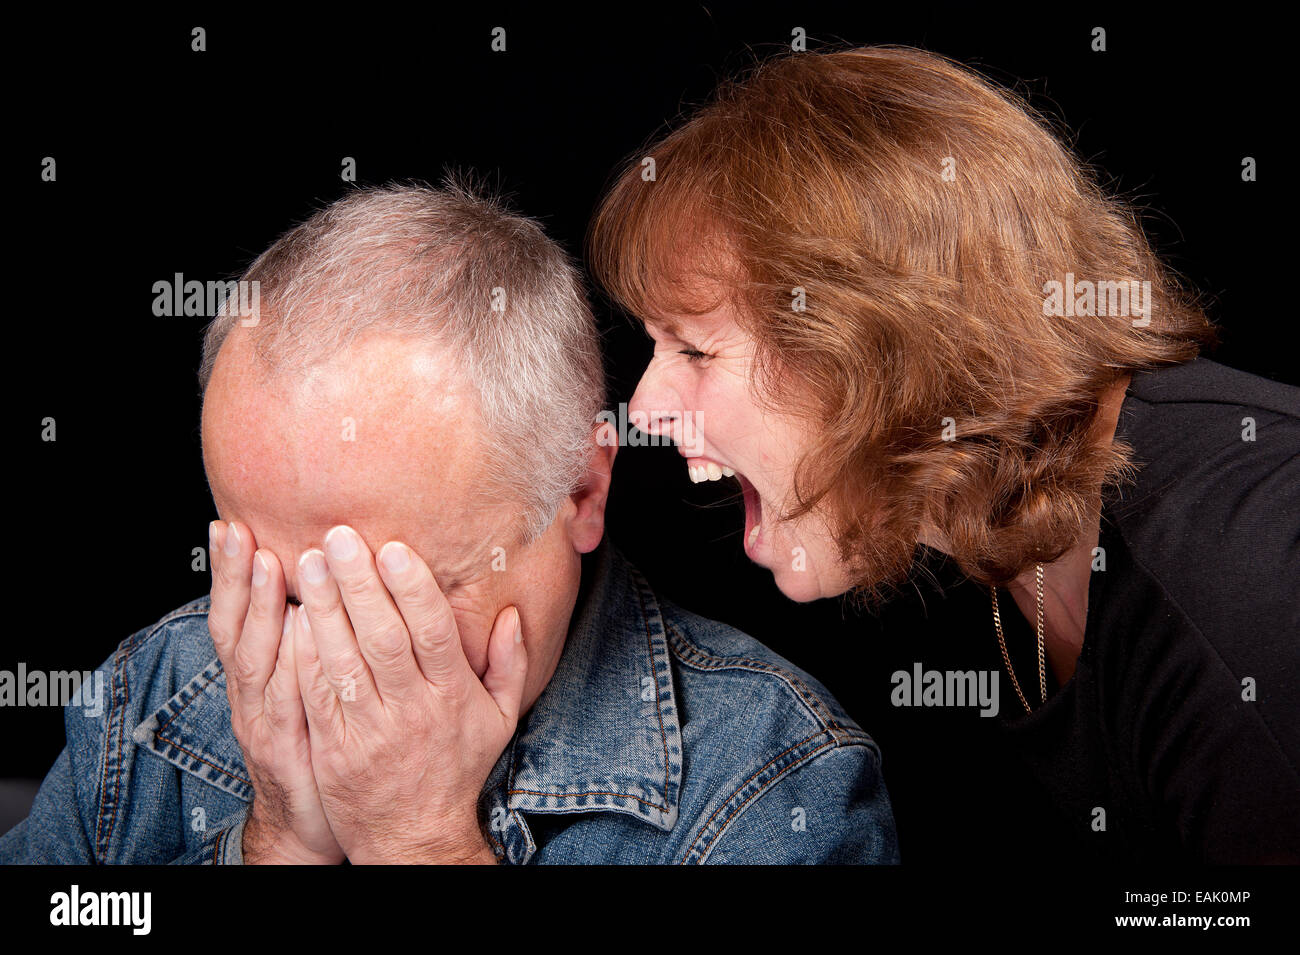 Middle aged couple having an argument, with the woman shouting at the man while he is crying. Stock Photo